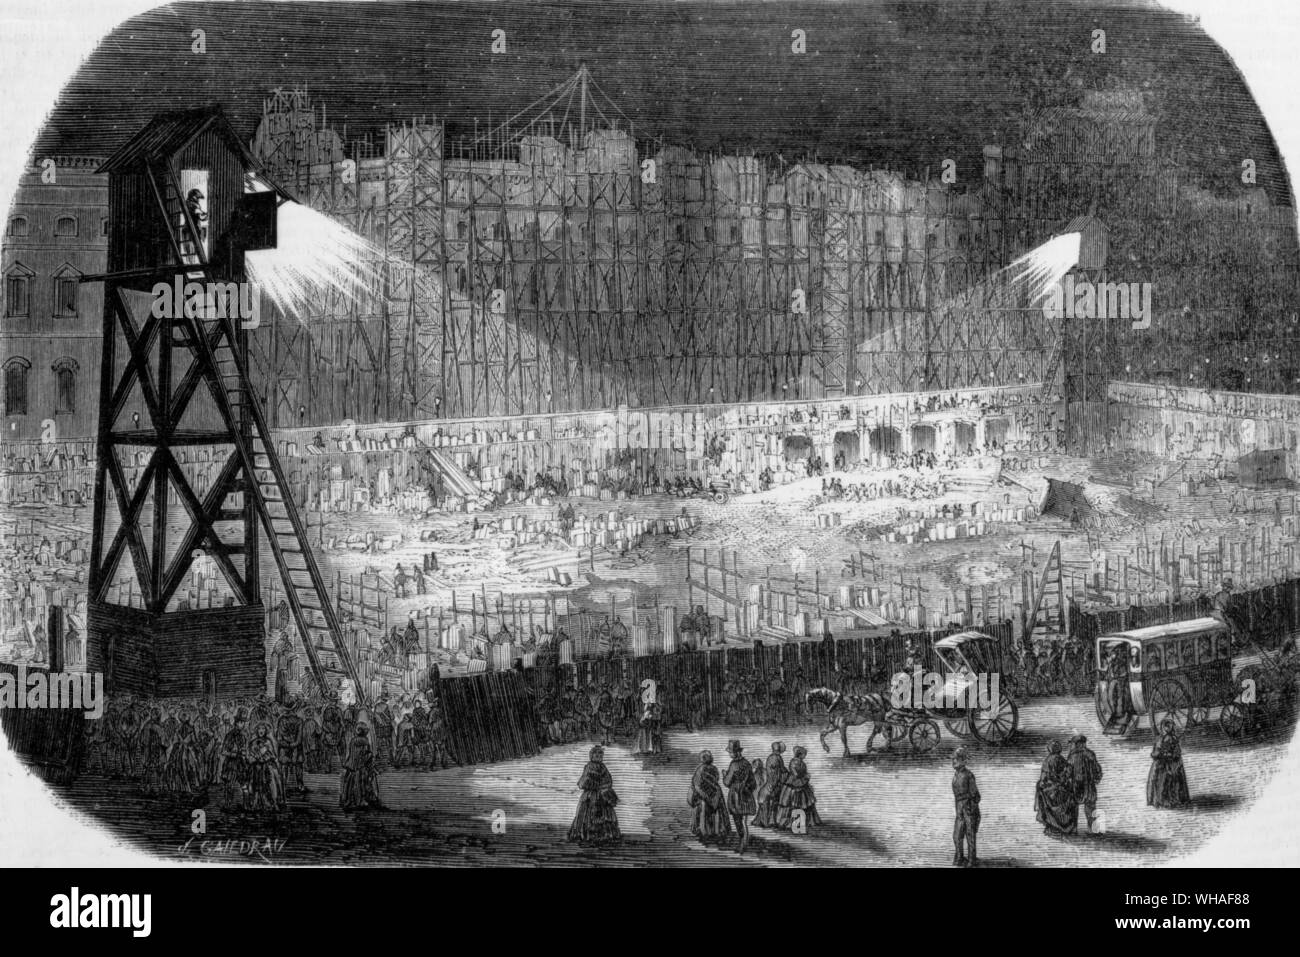 L'Illustration 30th September 1854. Construction work on the Rue de Rivoli Paris, the work is lit up by electric light Stock Photo